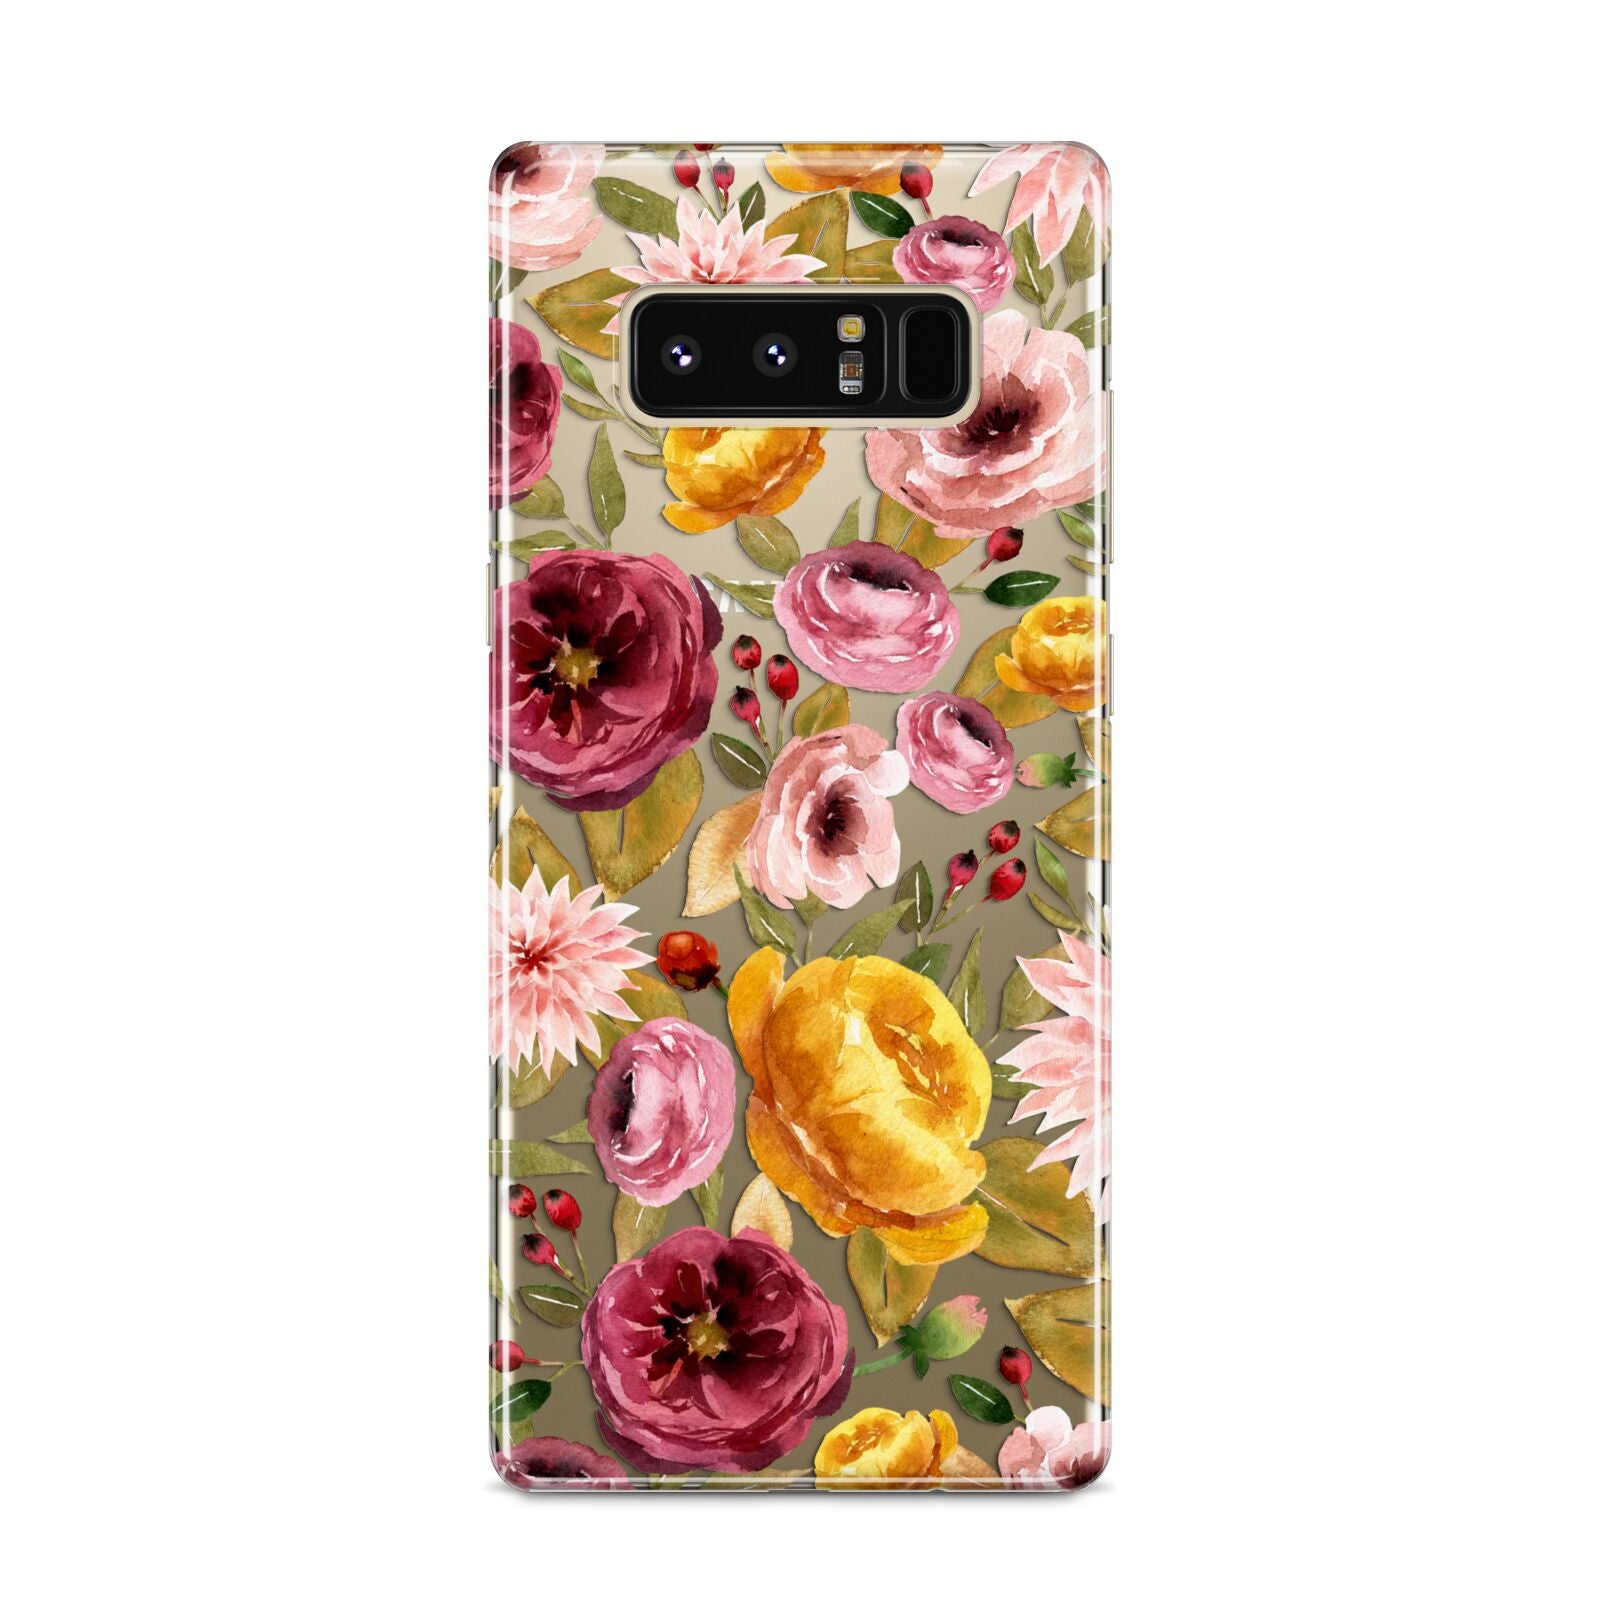 Pink and Mustard Floral Samsung Galaxy S8 Case